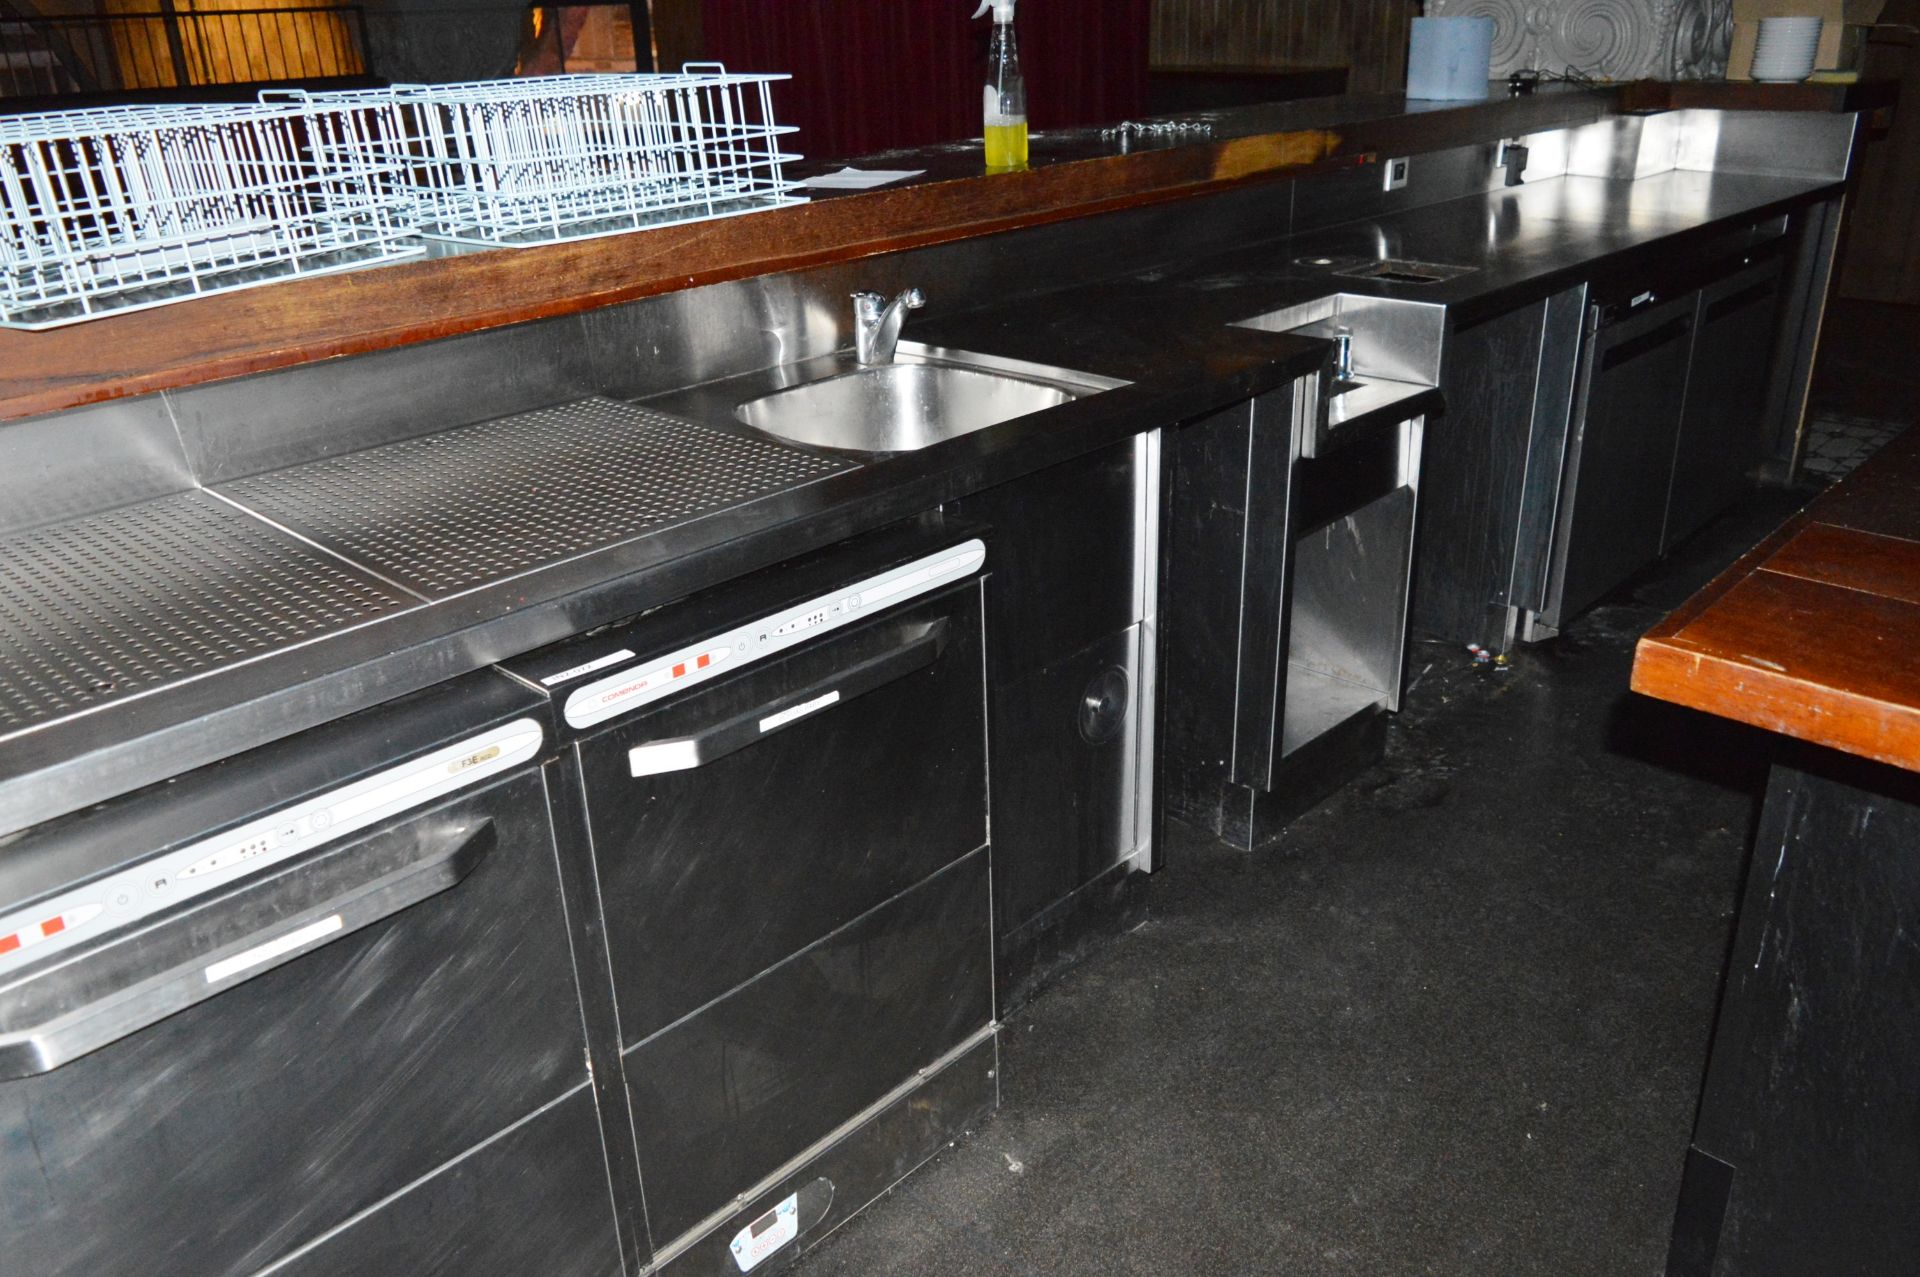 1 x Stainless Steel Bar Server Unit With Wash Basins - More Info to Follow - CL350 - Ref In2-060 -